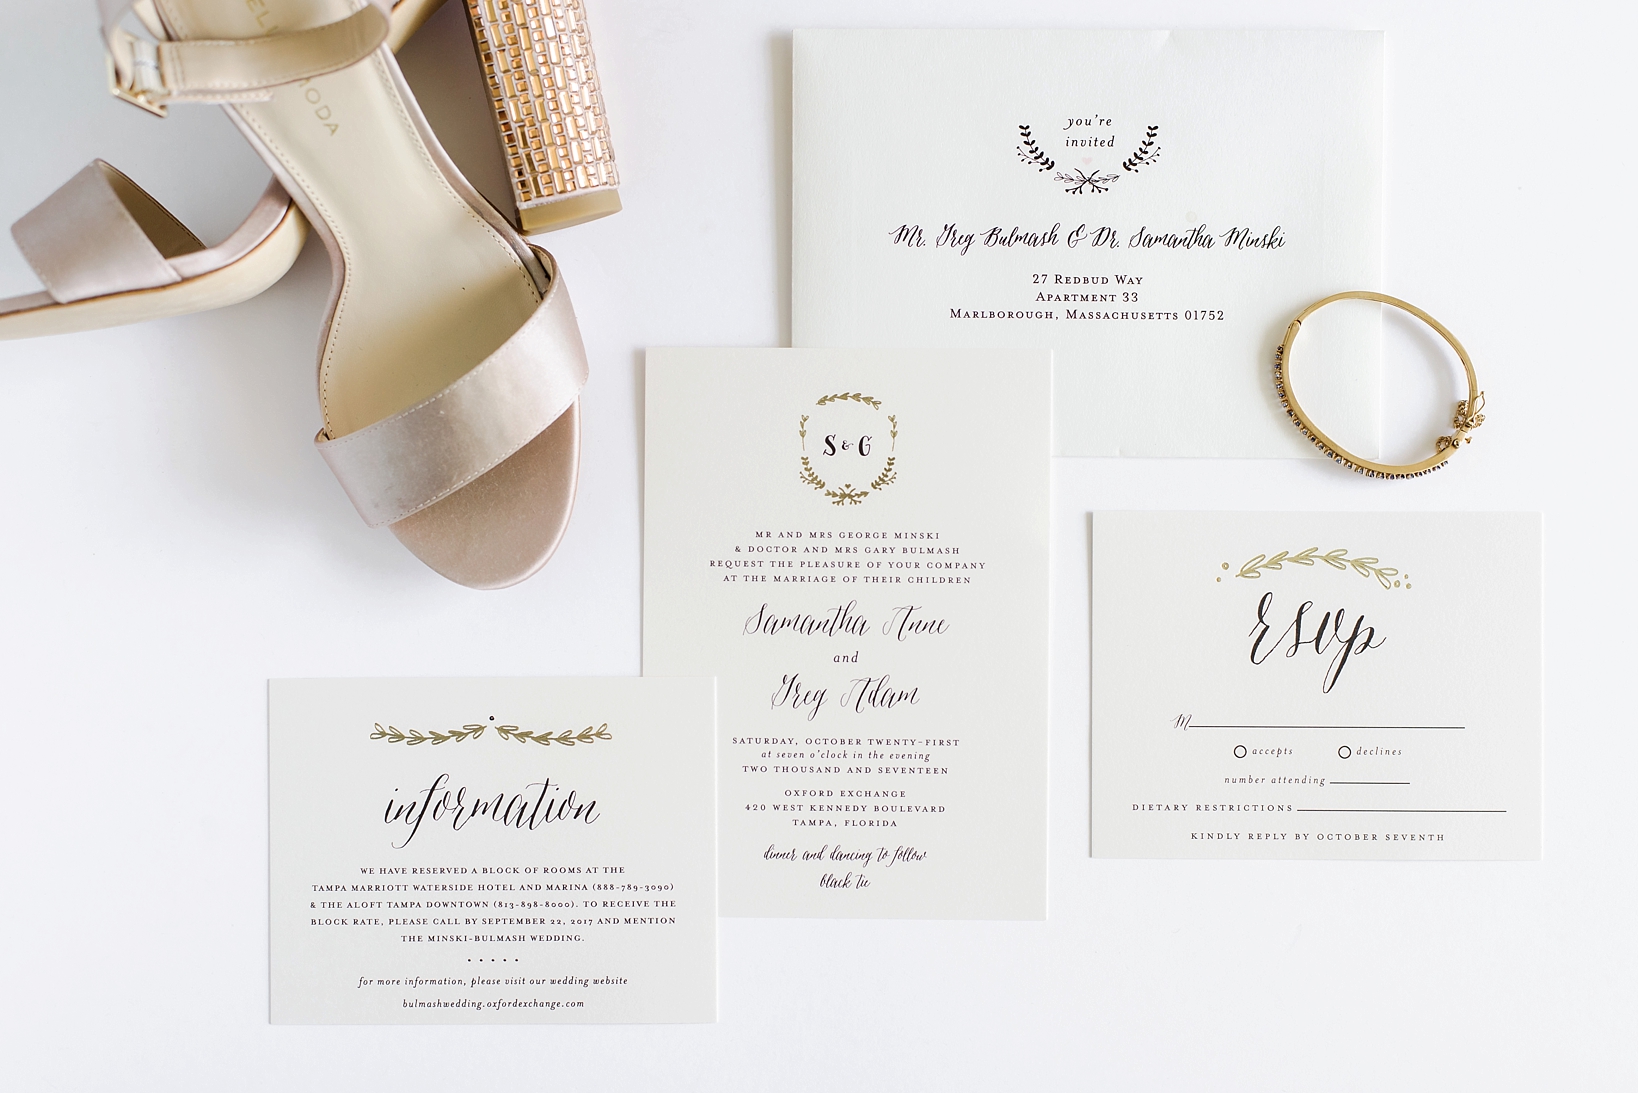 Wedding invitation suite for an Oxford Exchange wedding with brides shoes and jewelry